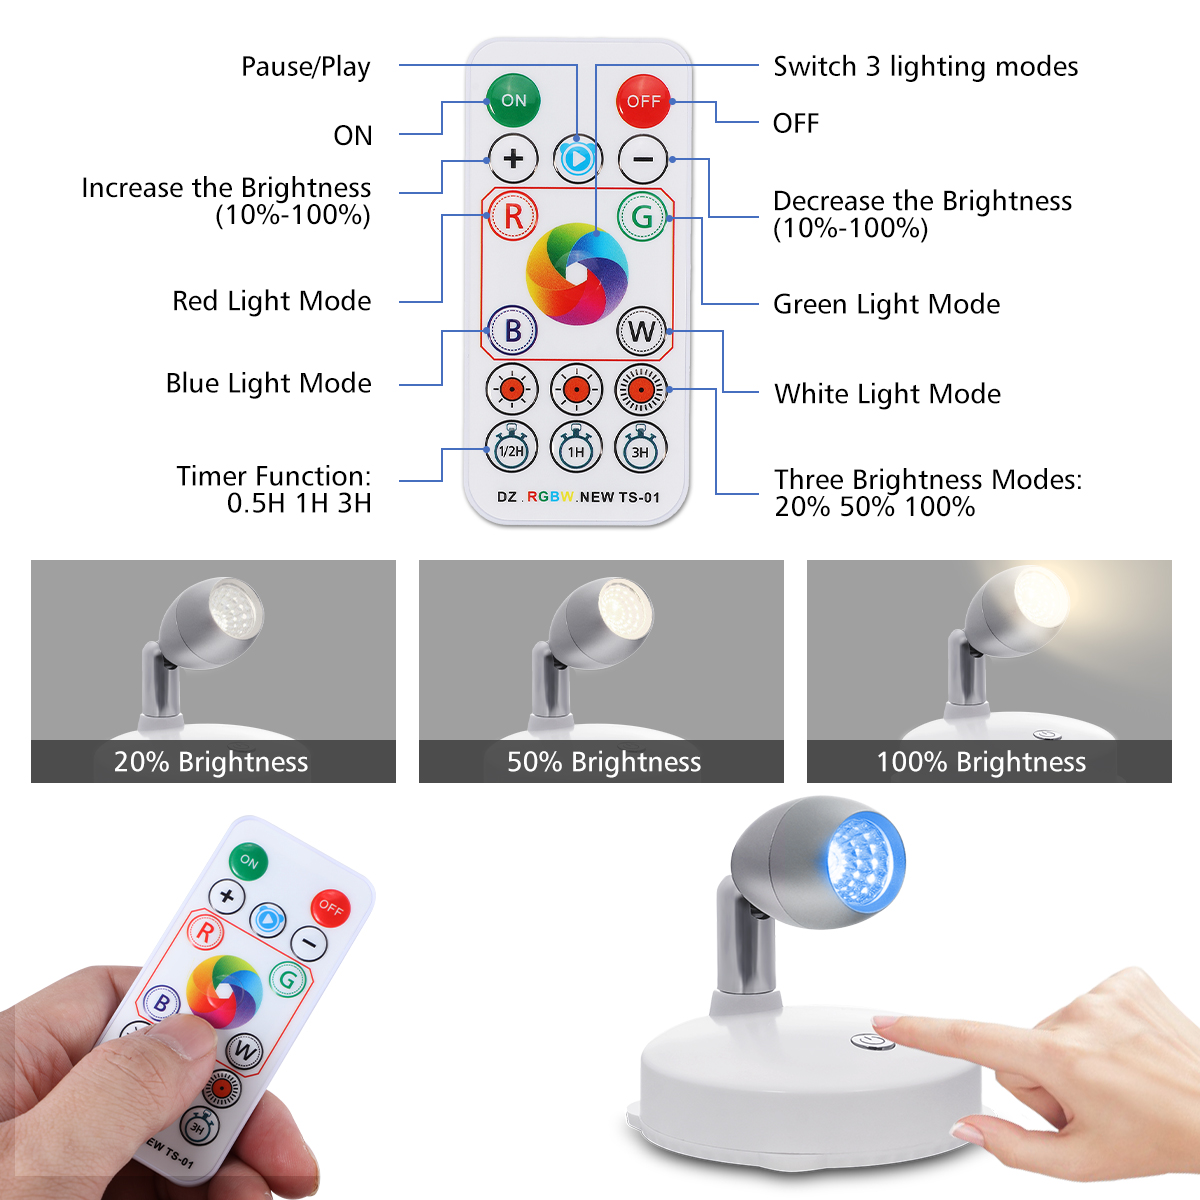 2PCS-Elfeland-Battery-Powered-RGB-LED-Cabinet-Light-Spotlights-with-Two-Remote-Controls-for-Wardrobe-1715076-5